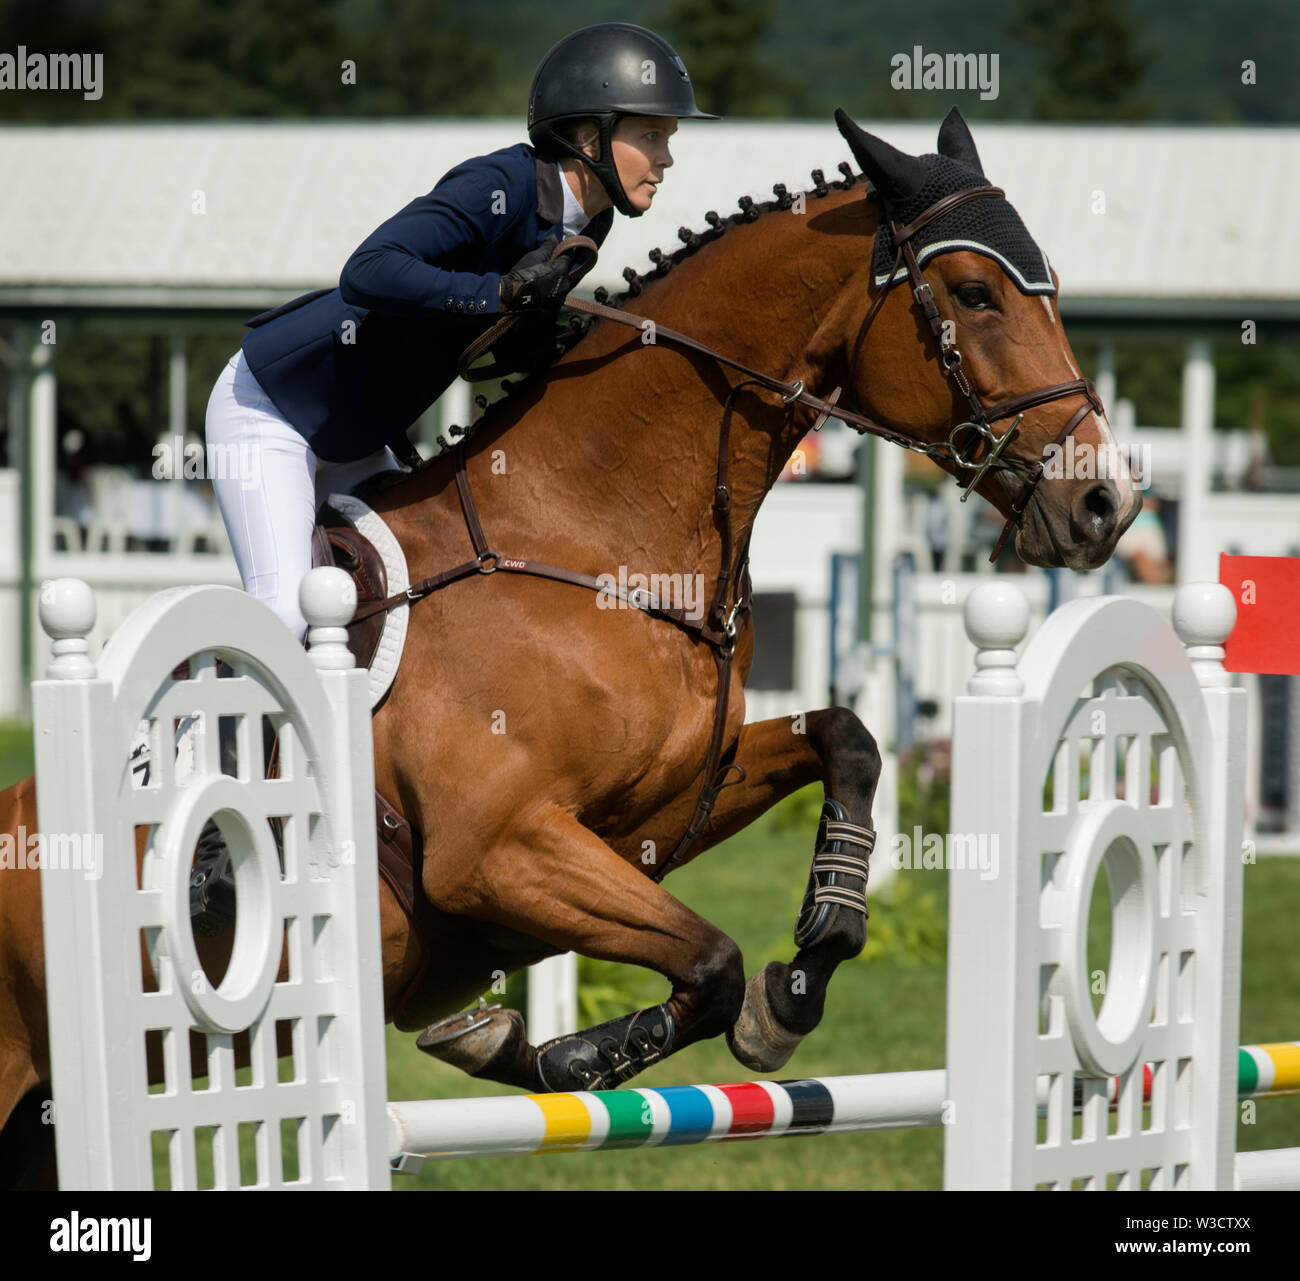 50th annual Lake Placid horse show (LPHS) at Lake Placid NY., USA.  700 horses competed in the 2019 hunter and Jumper competition in Lake Placid. Stock Photo